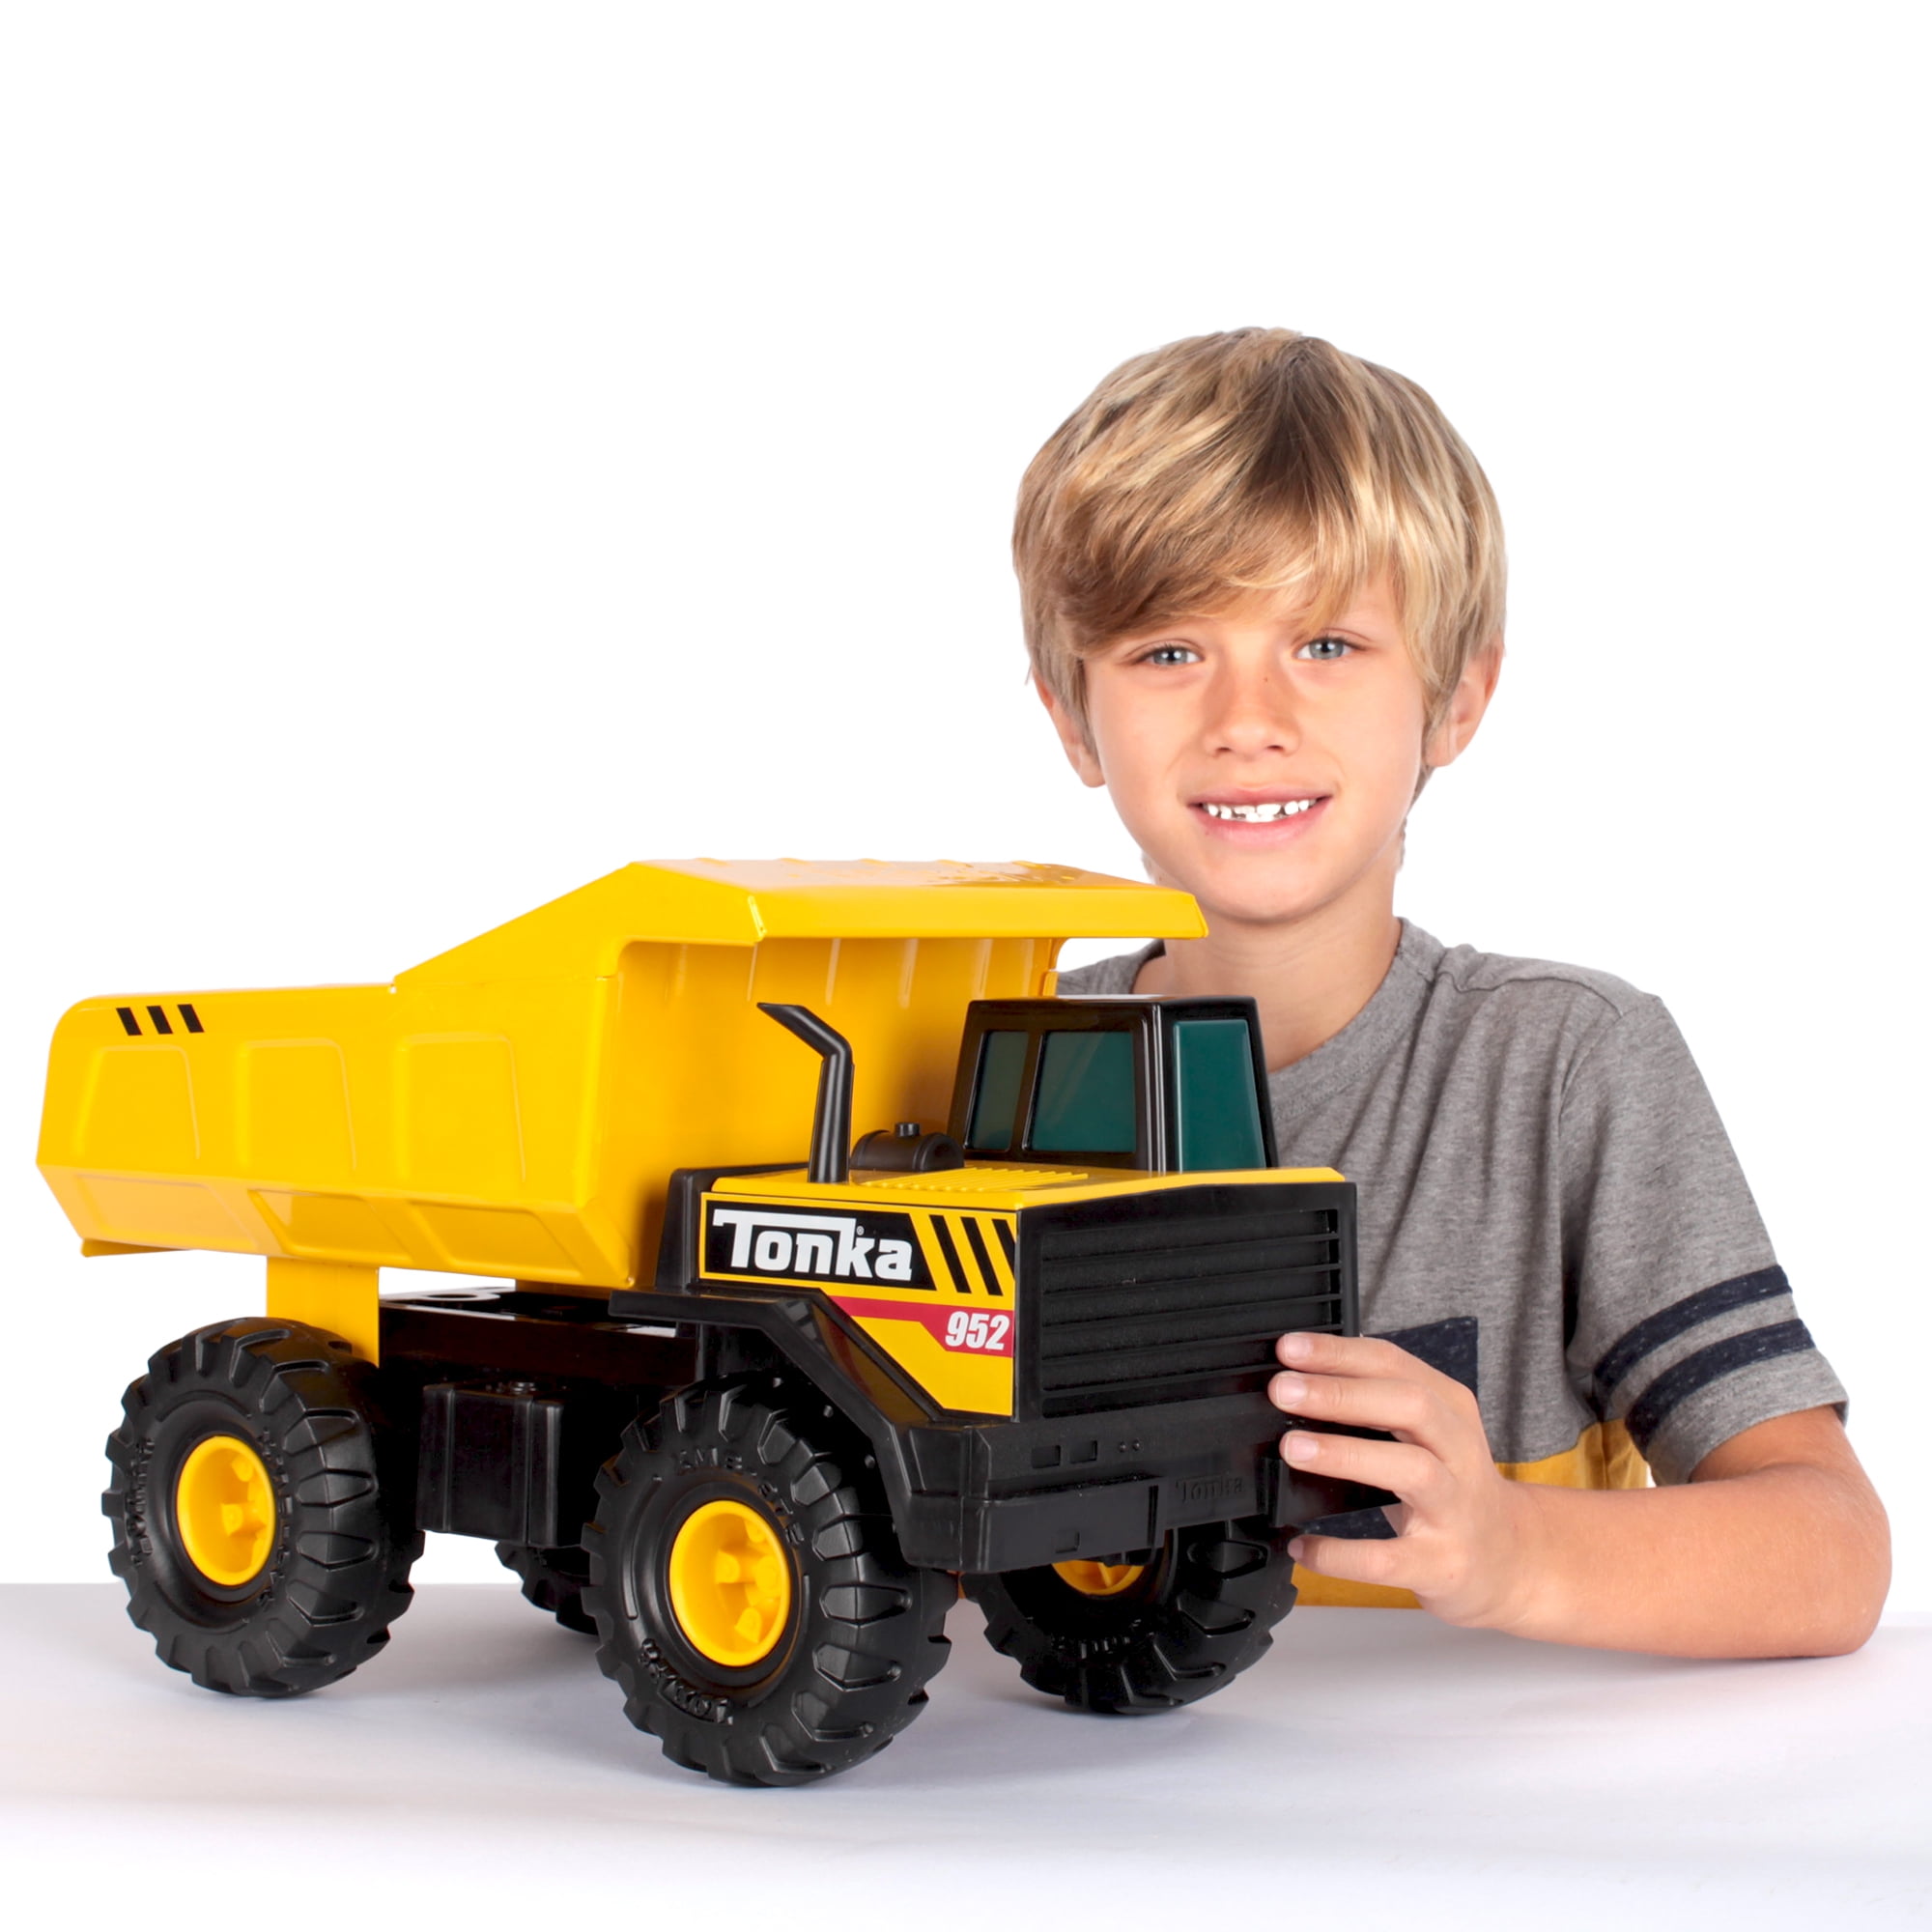 Tonka Mighty Dump Front Loader Truck Classic Steel Vehicle Toy Kids Fun Play New 